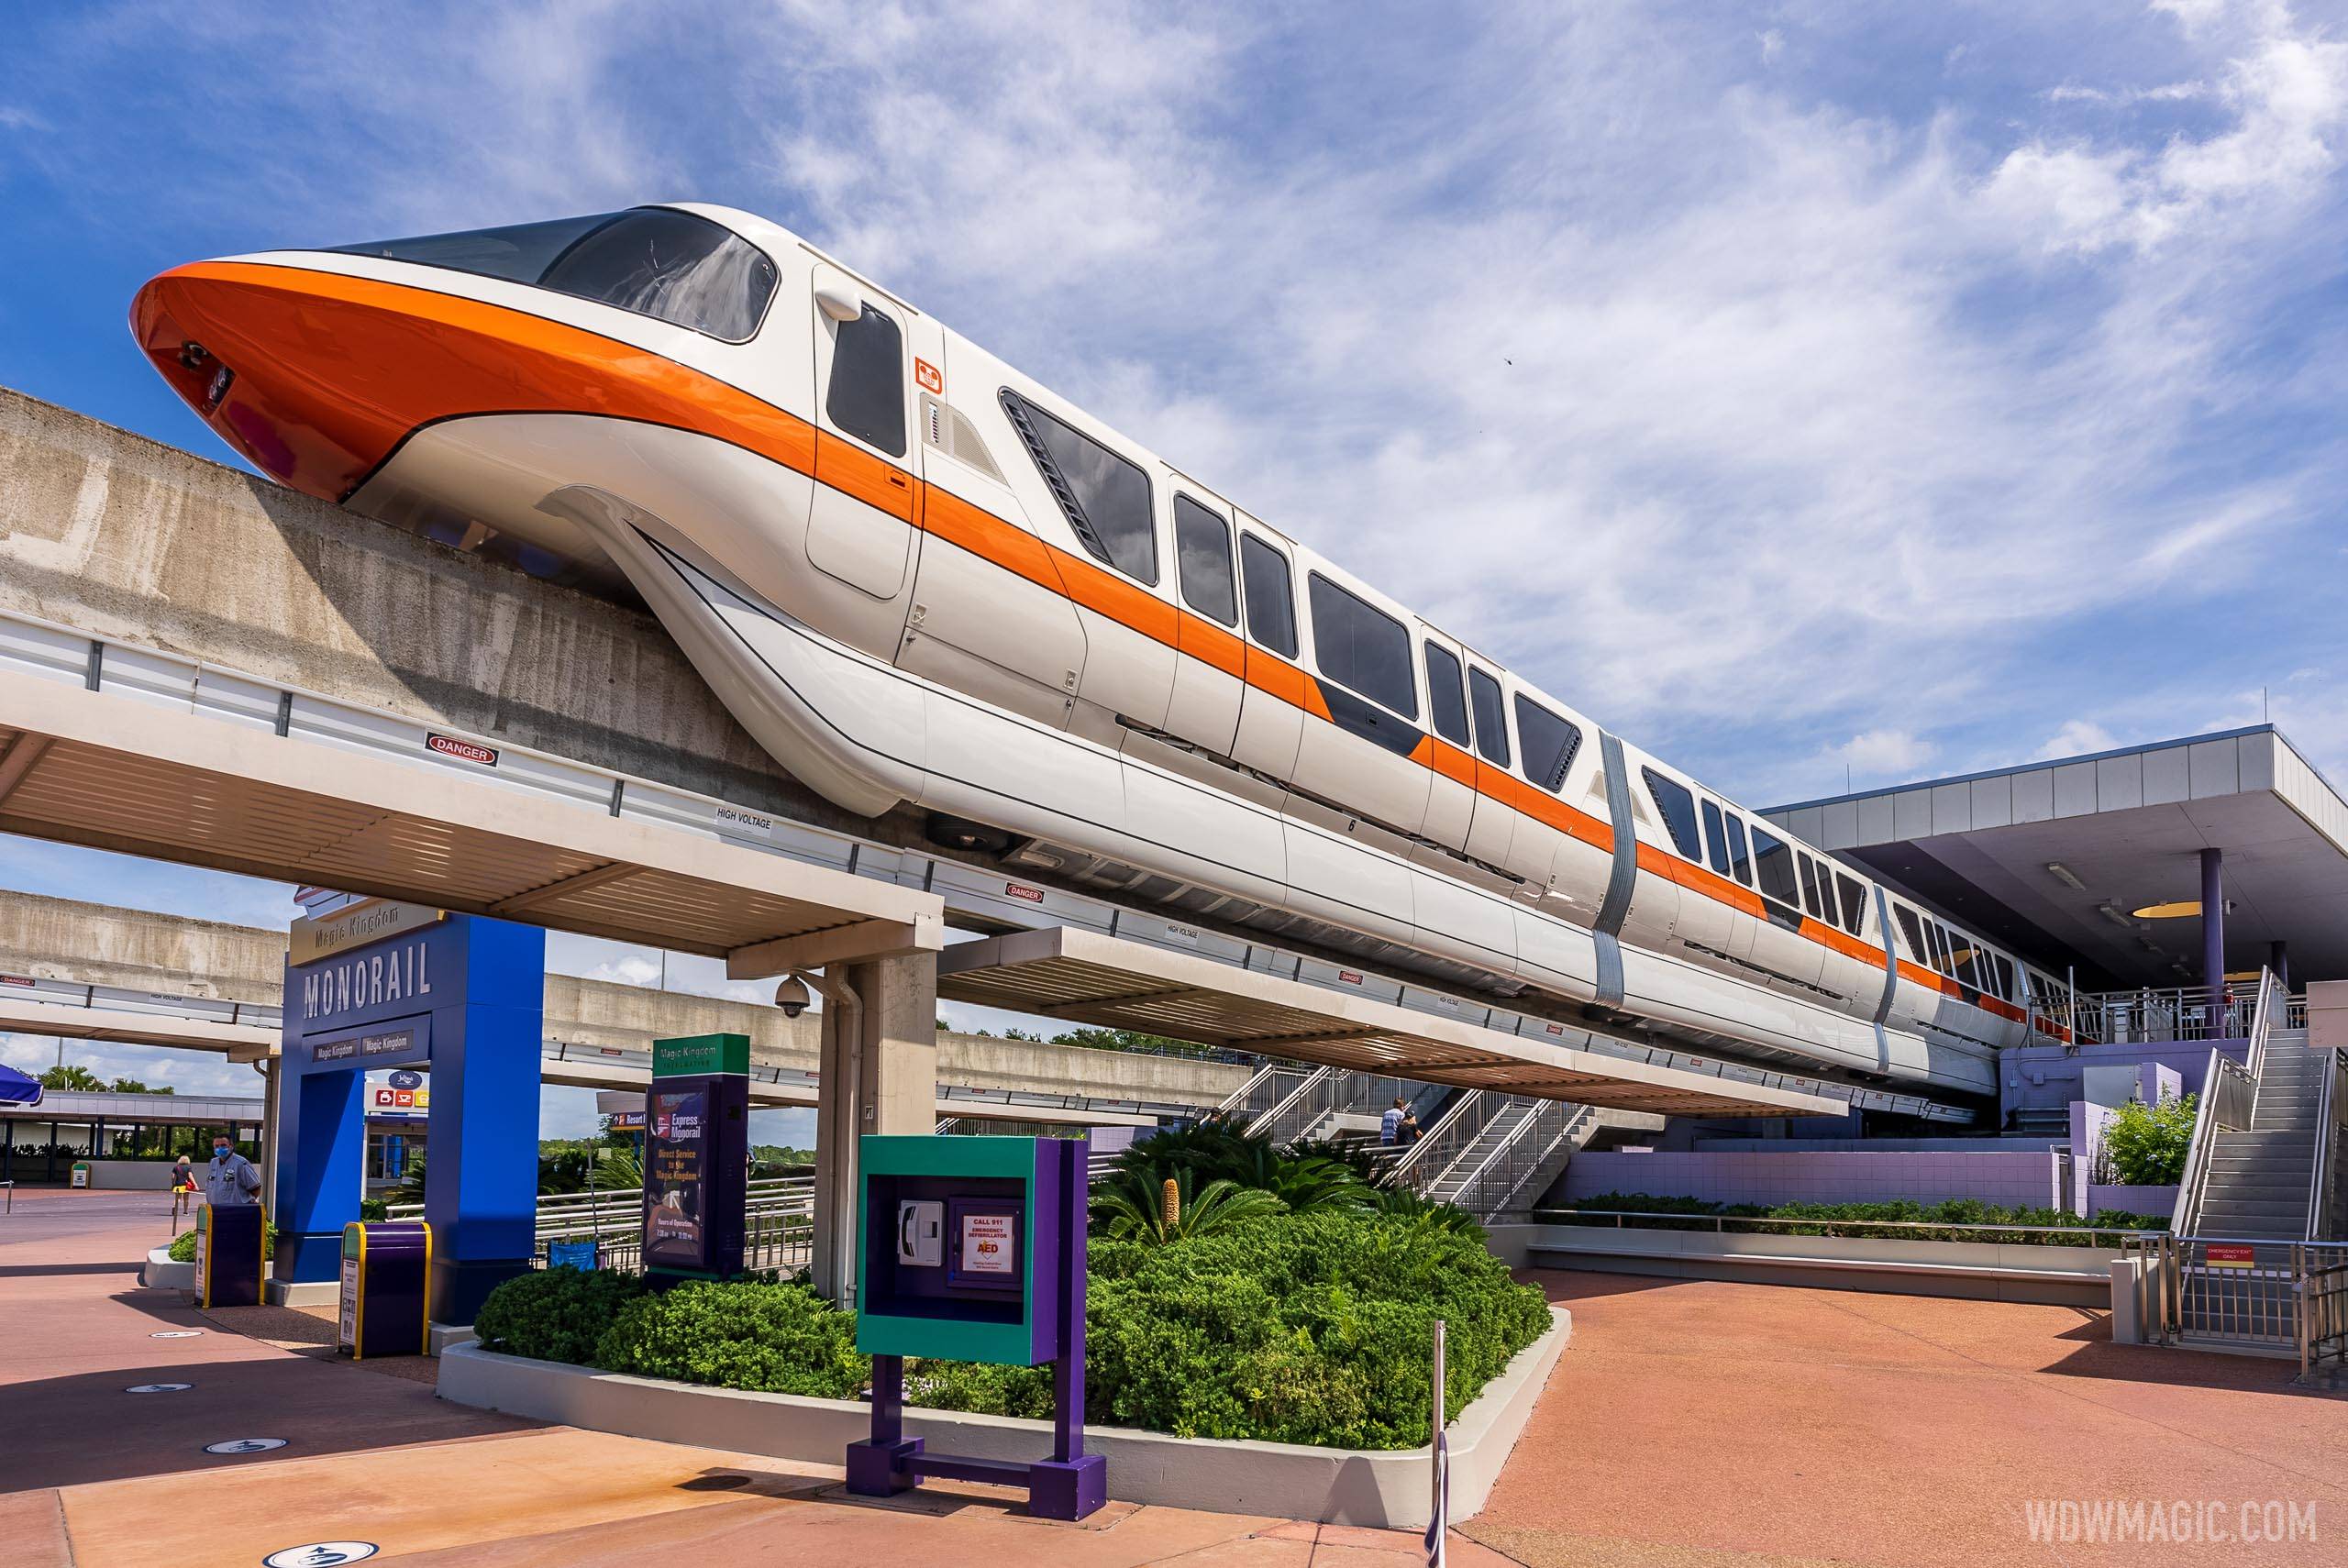 Masks will still be required on Walt Disney World transportation systems including the monorail